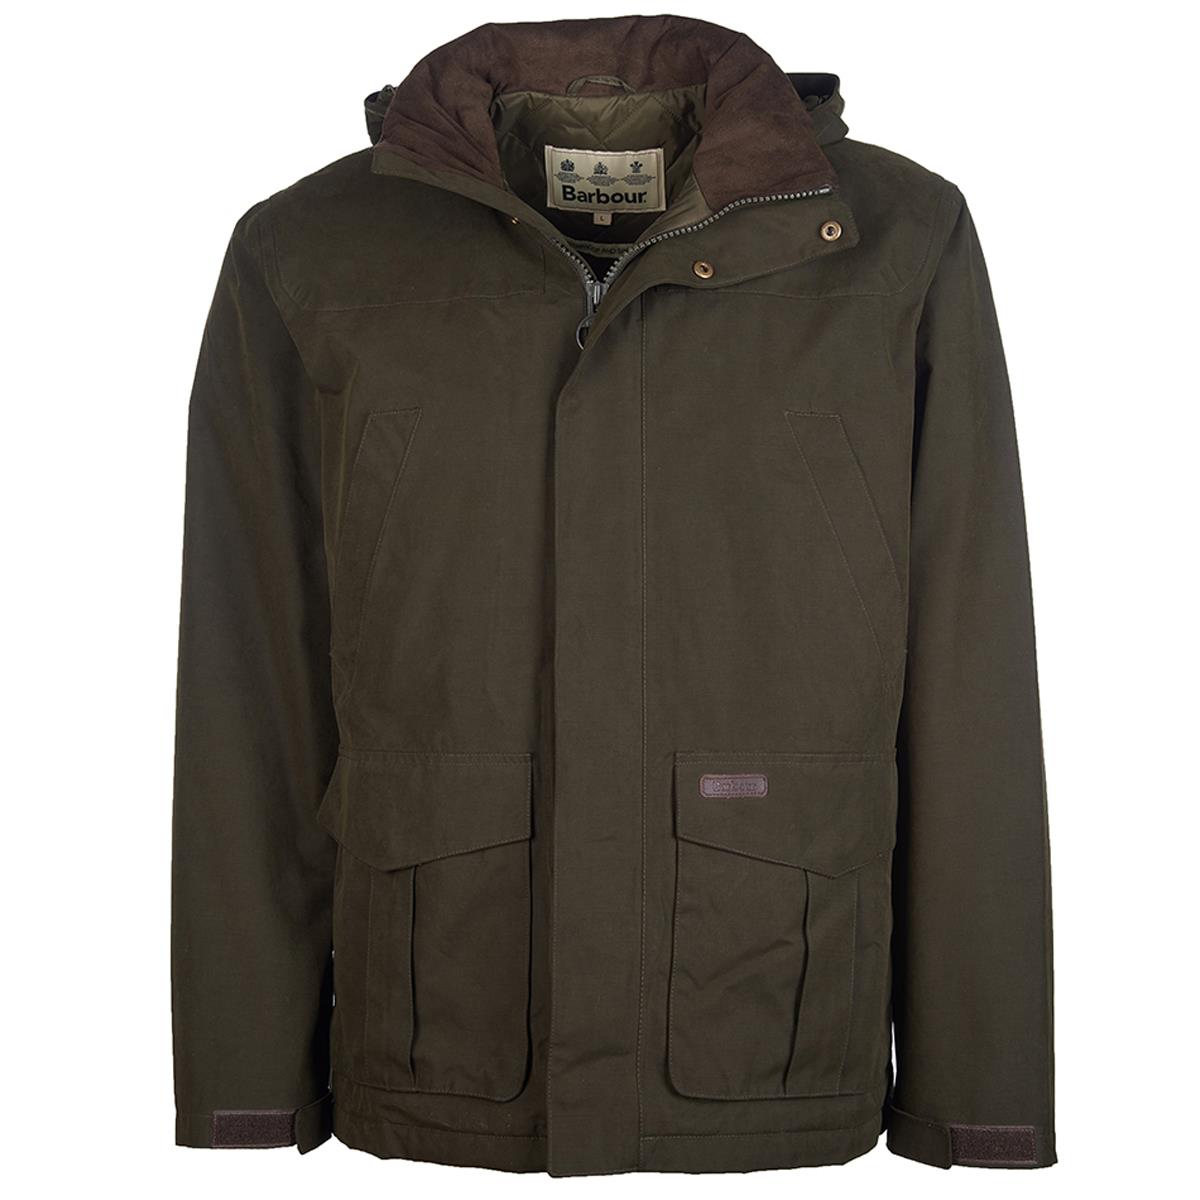 What sizes & colors does the Barbour Brockstone Jacket come in?